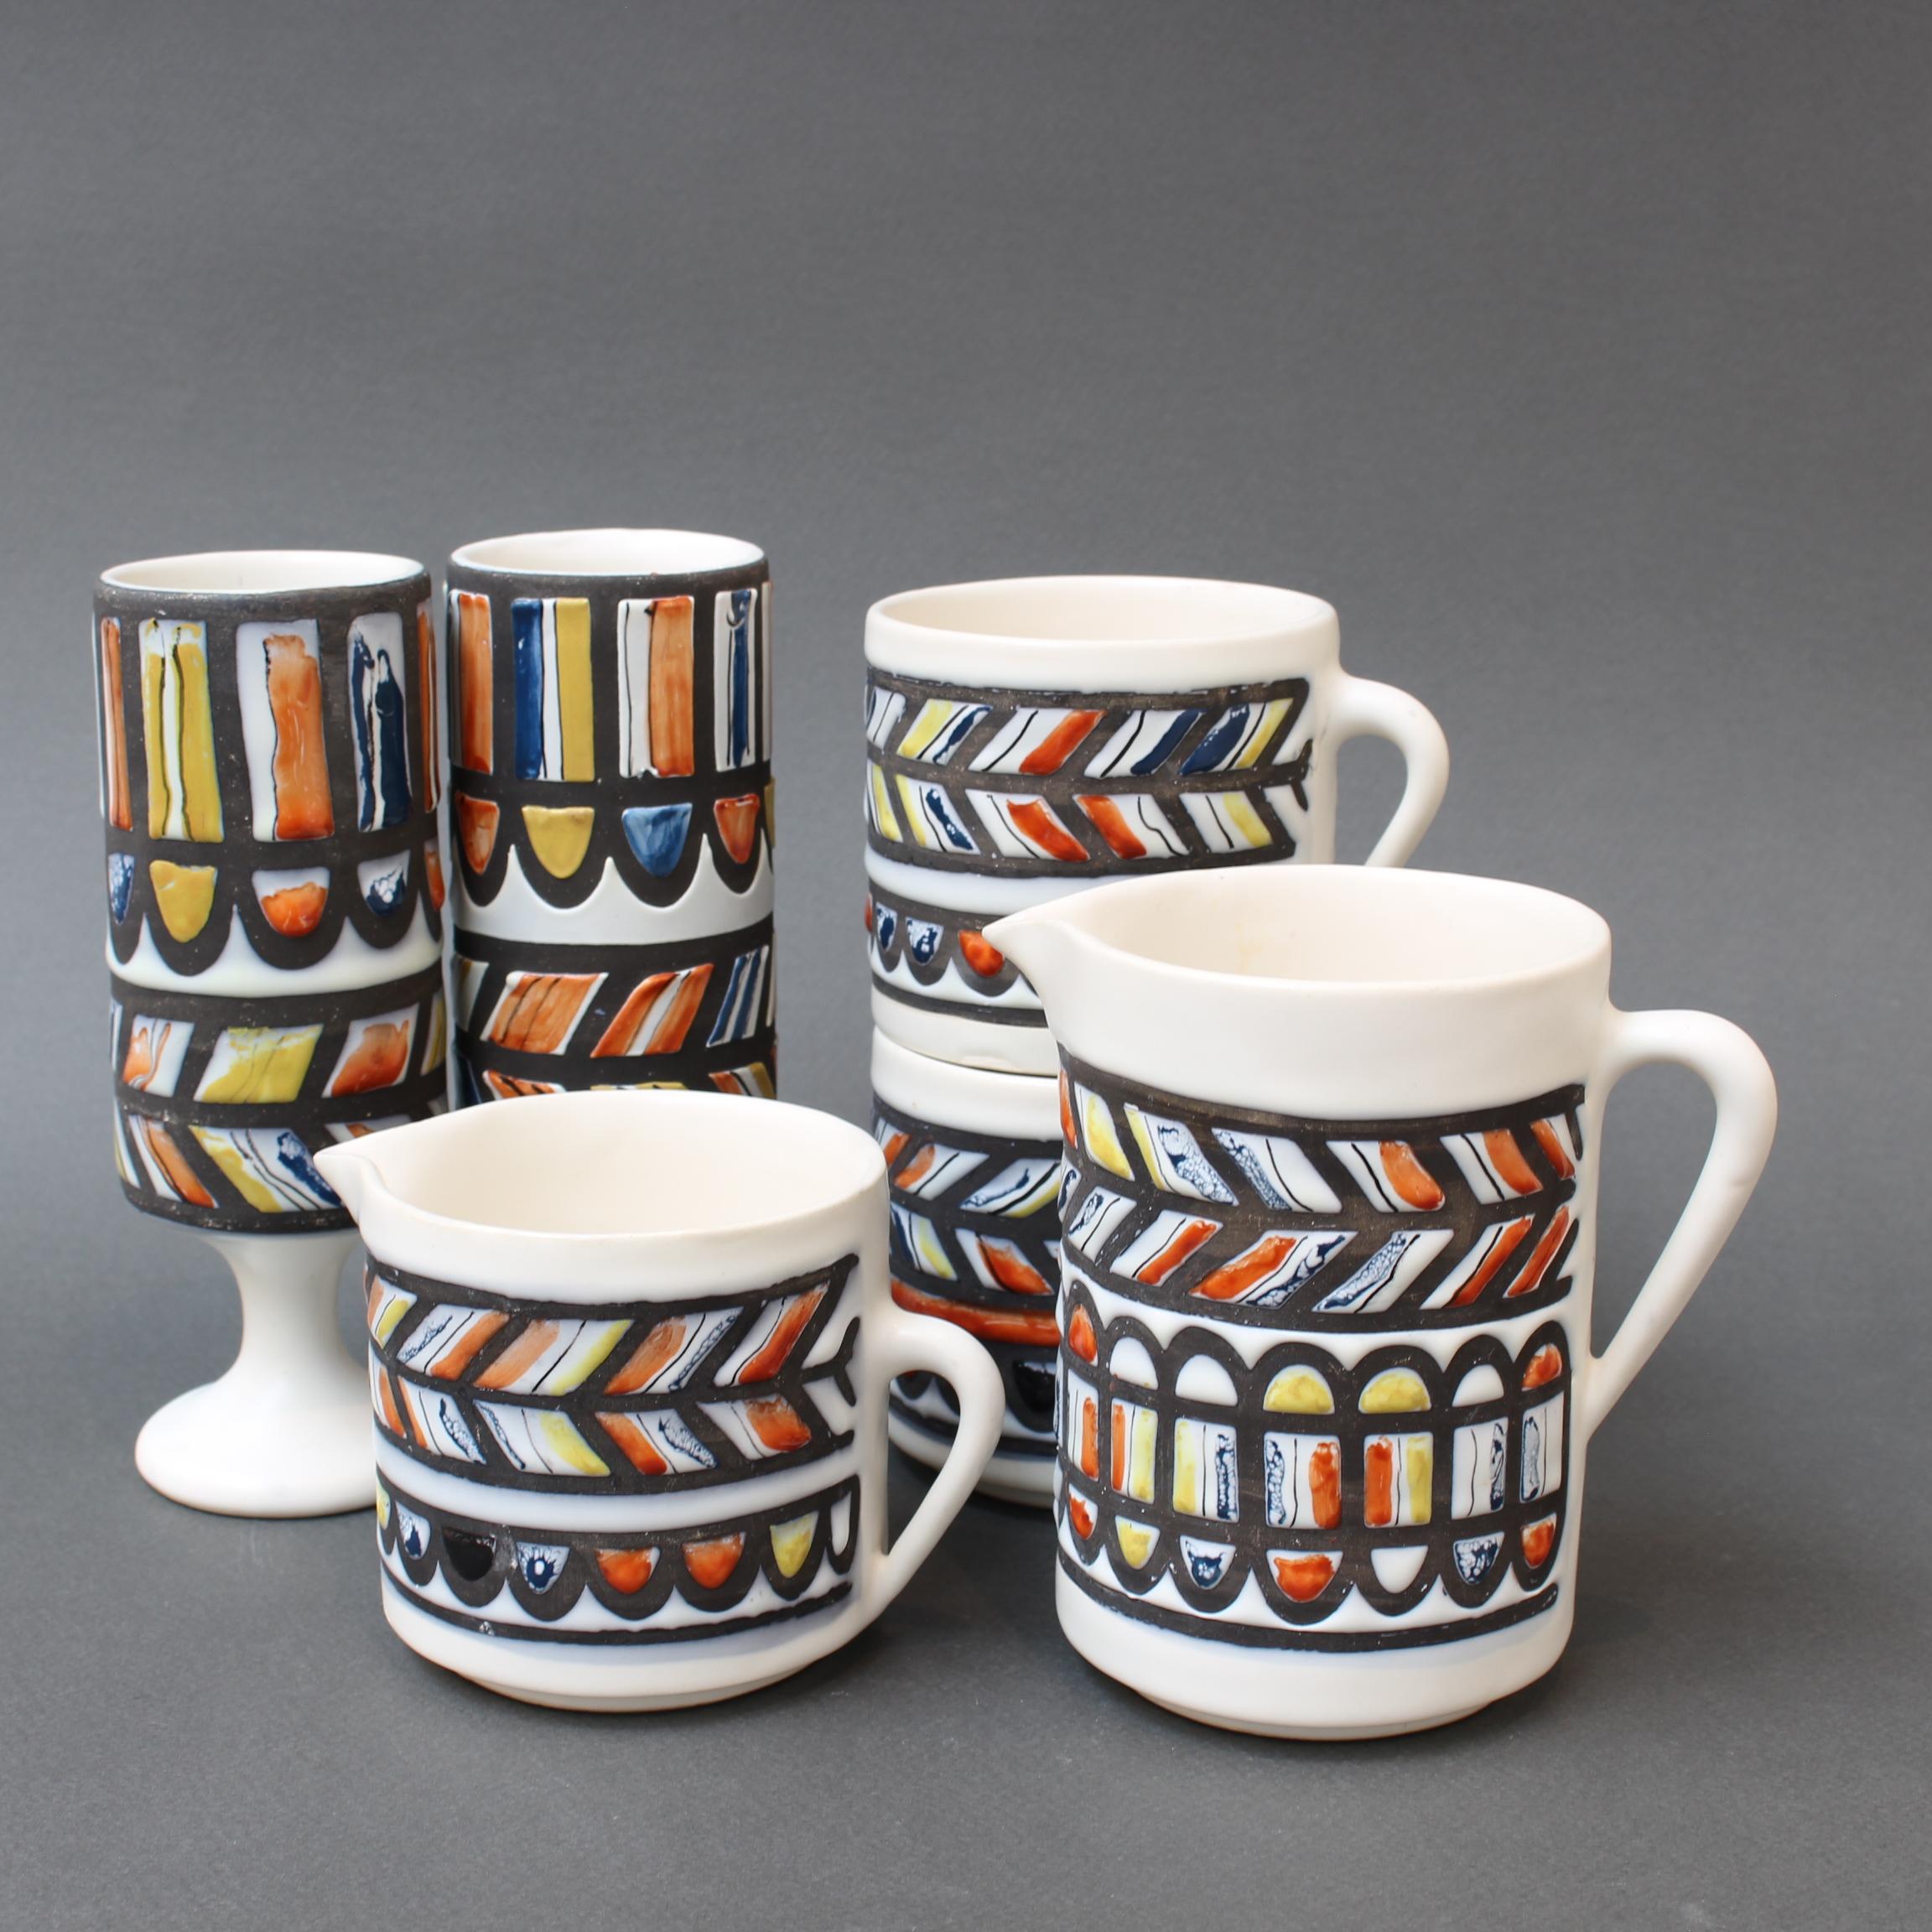 Vintage French Ceramic Set of Vessels by Roger Capron (circa 1960s) For Sale 10